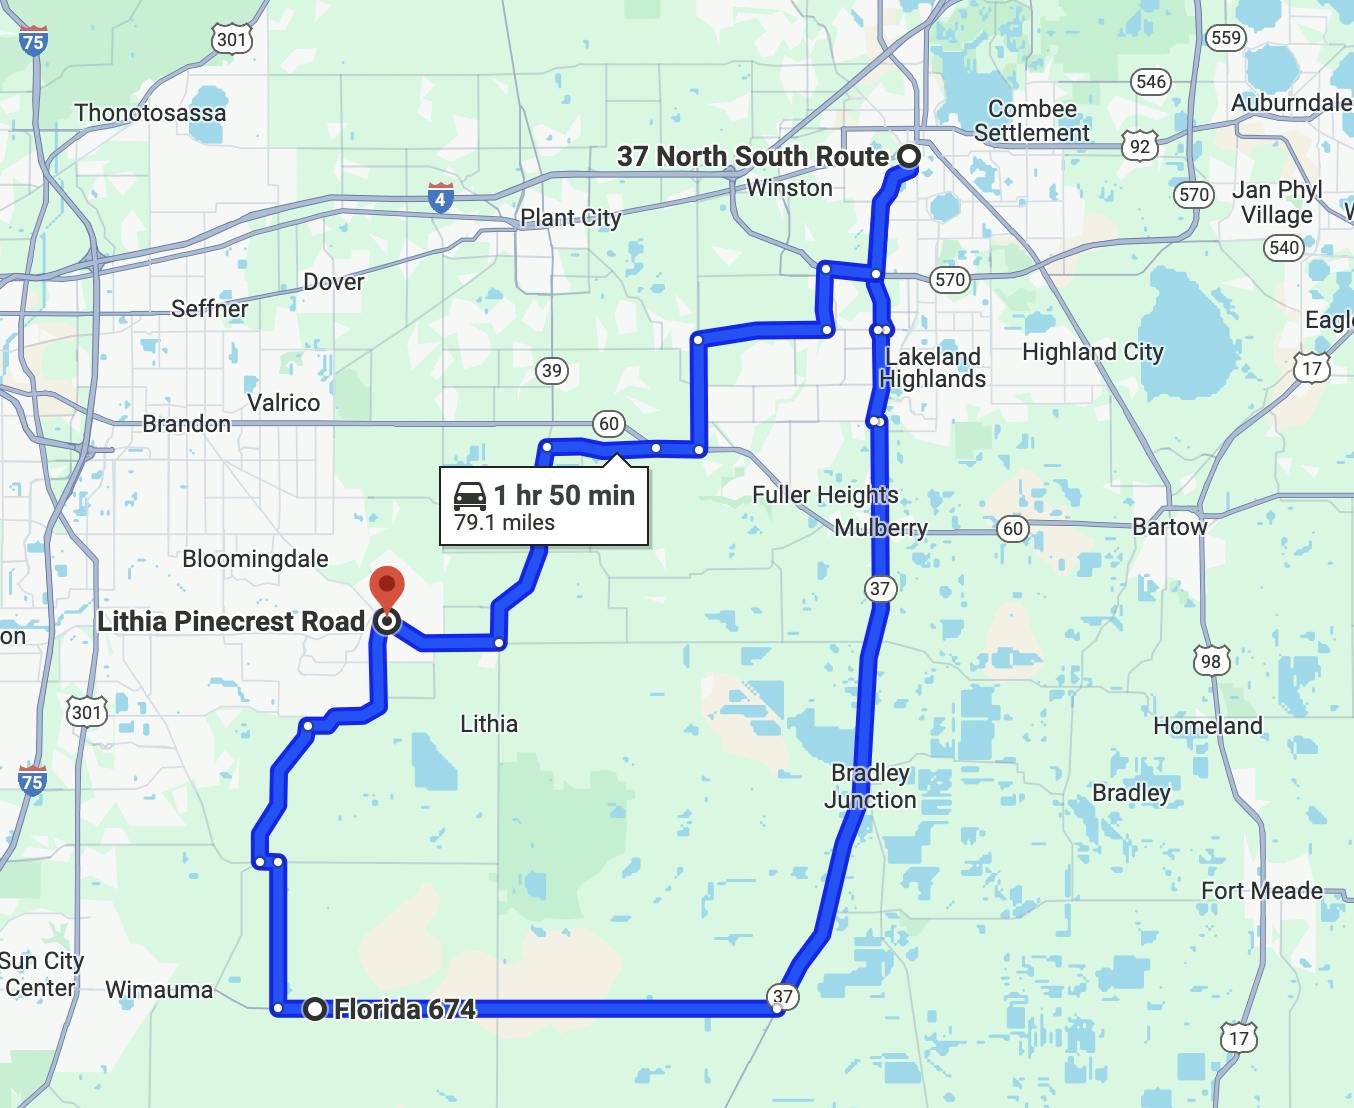 lithia pinecrest motorcycle route - tampa, fl